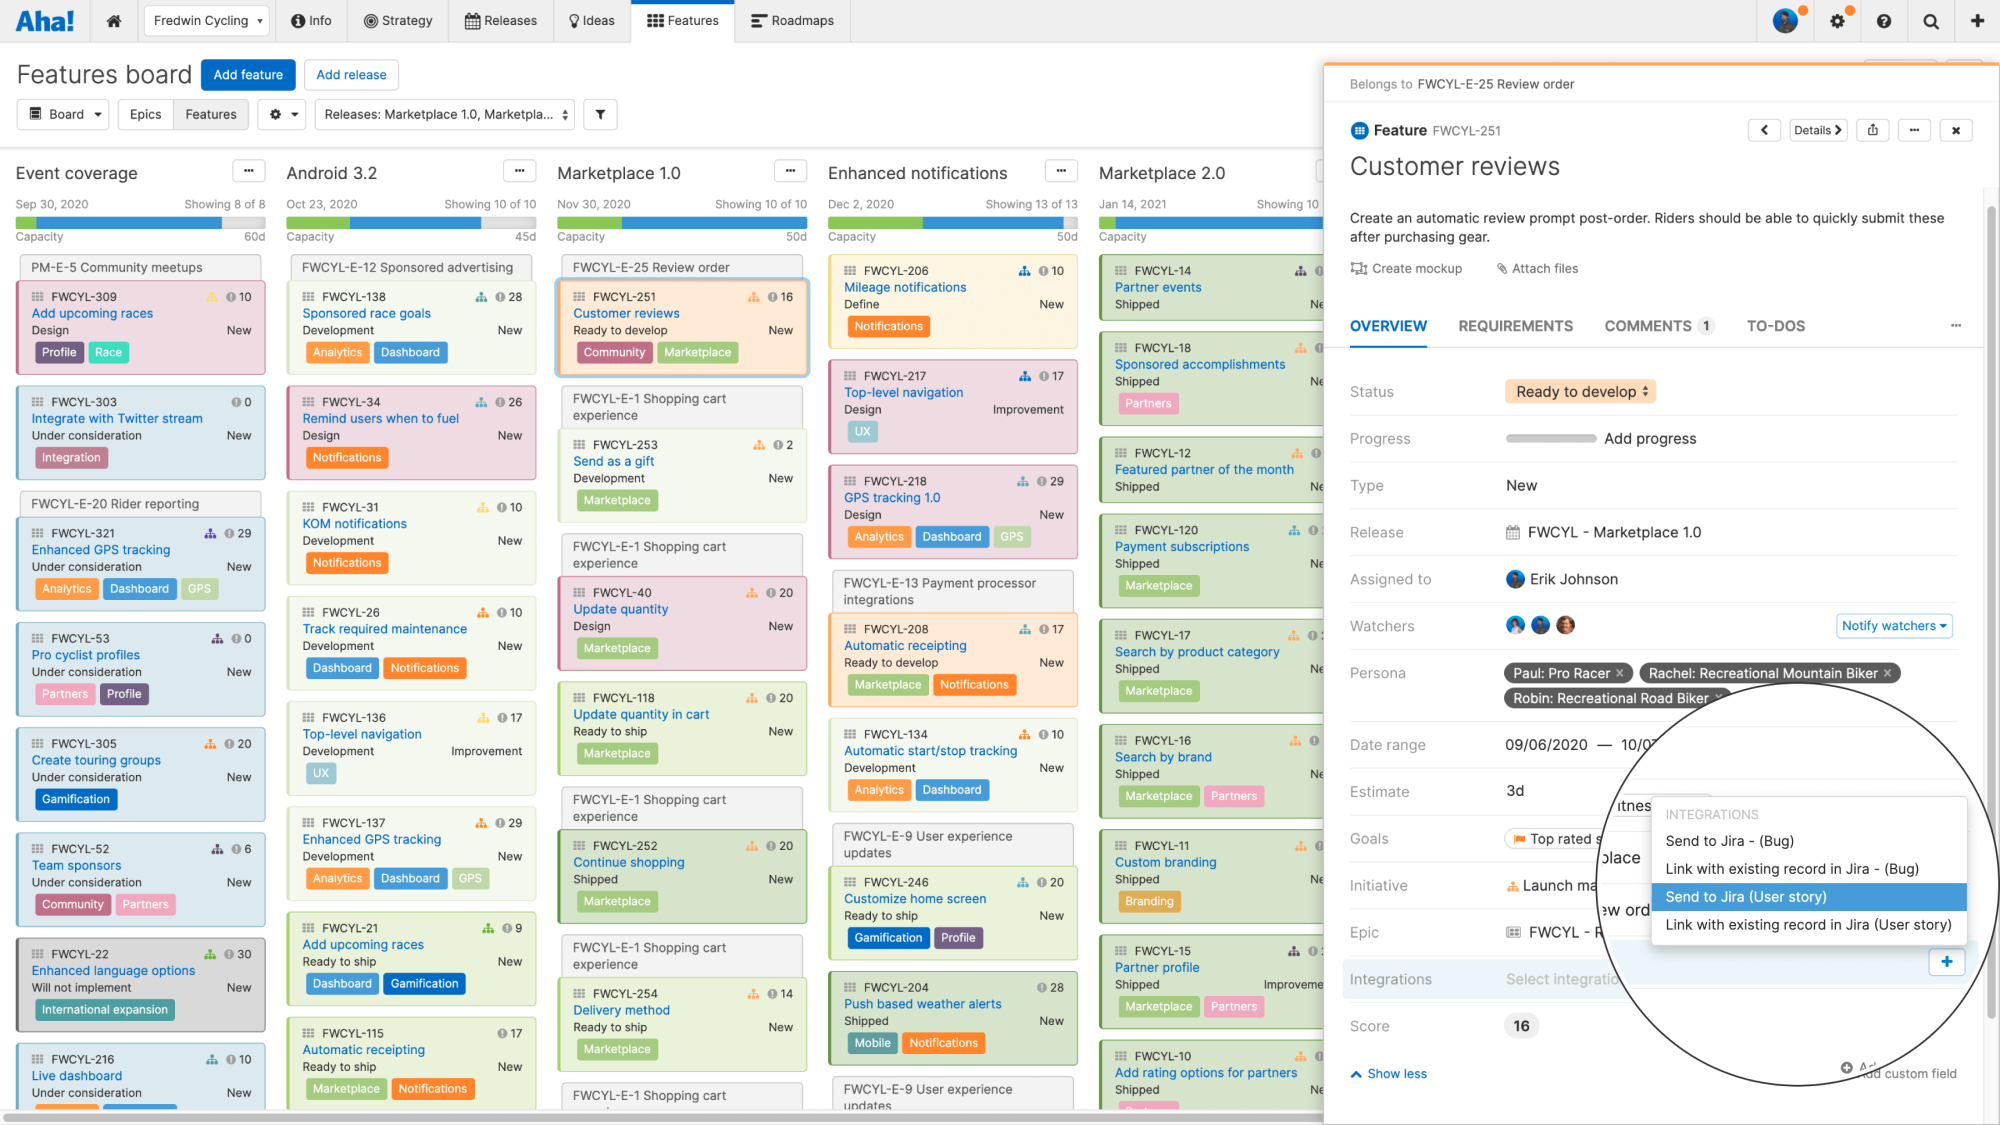 A feature drawer open in front of the features board with the send to Jira integration field open.